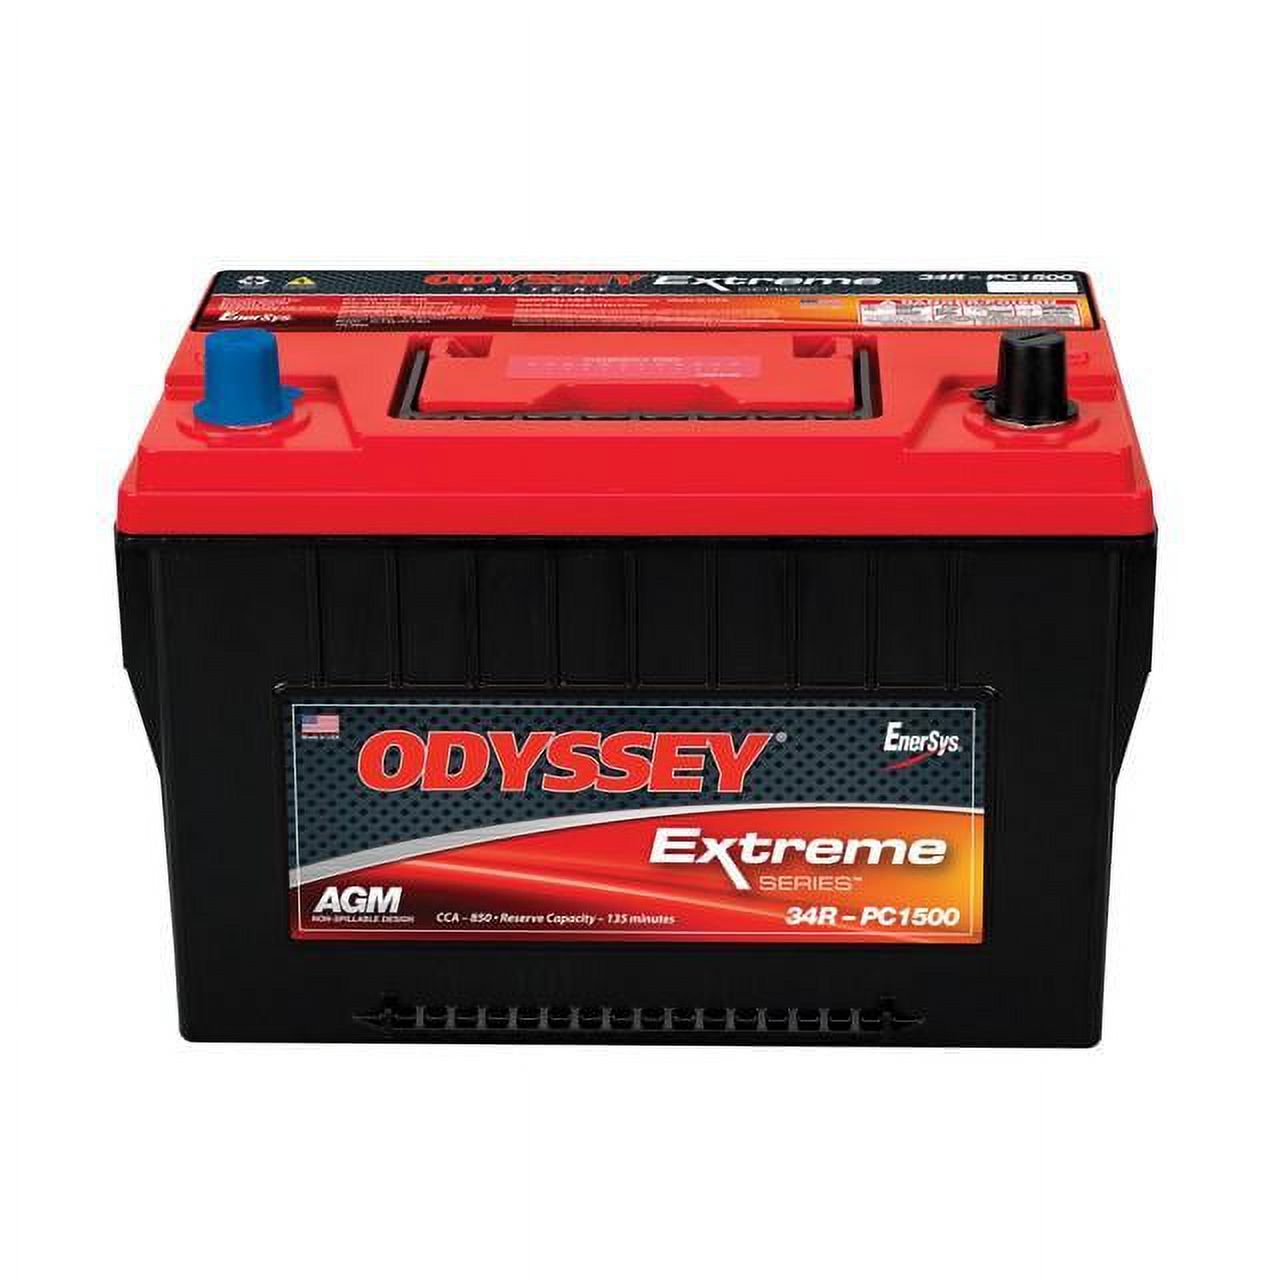 ODYSSEY Extreme Battery - ODX-AGM34R (34R-PC1500) - image 1 of 3